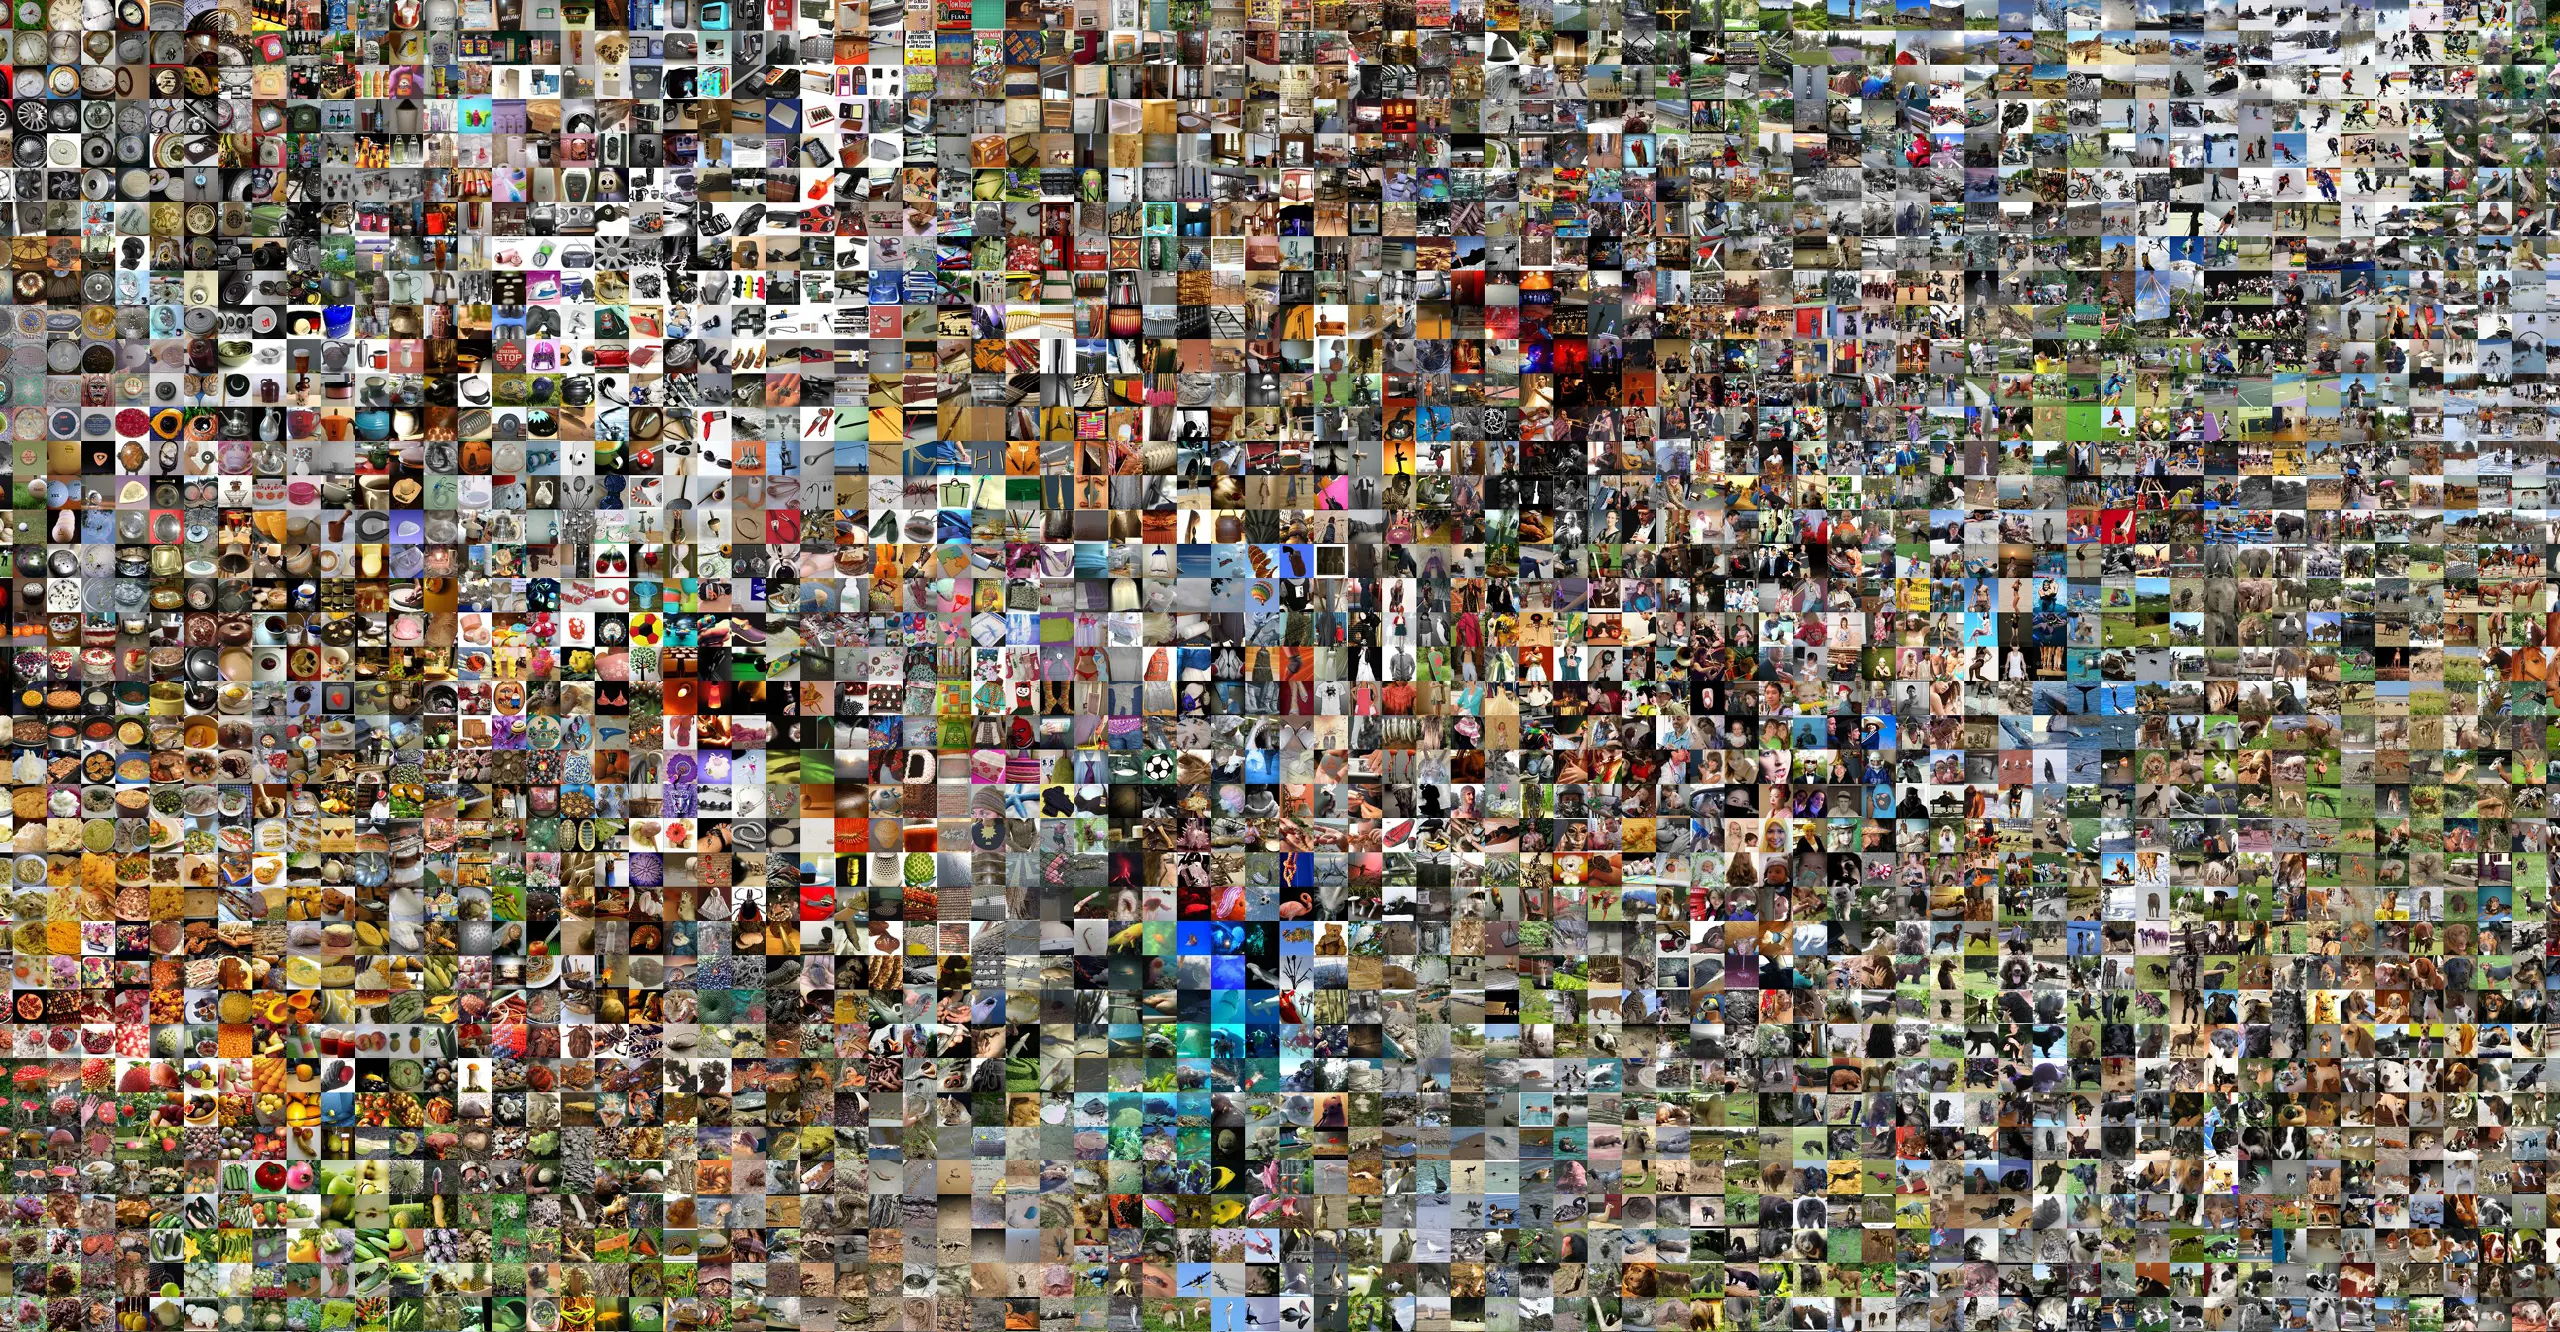 Grid of images